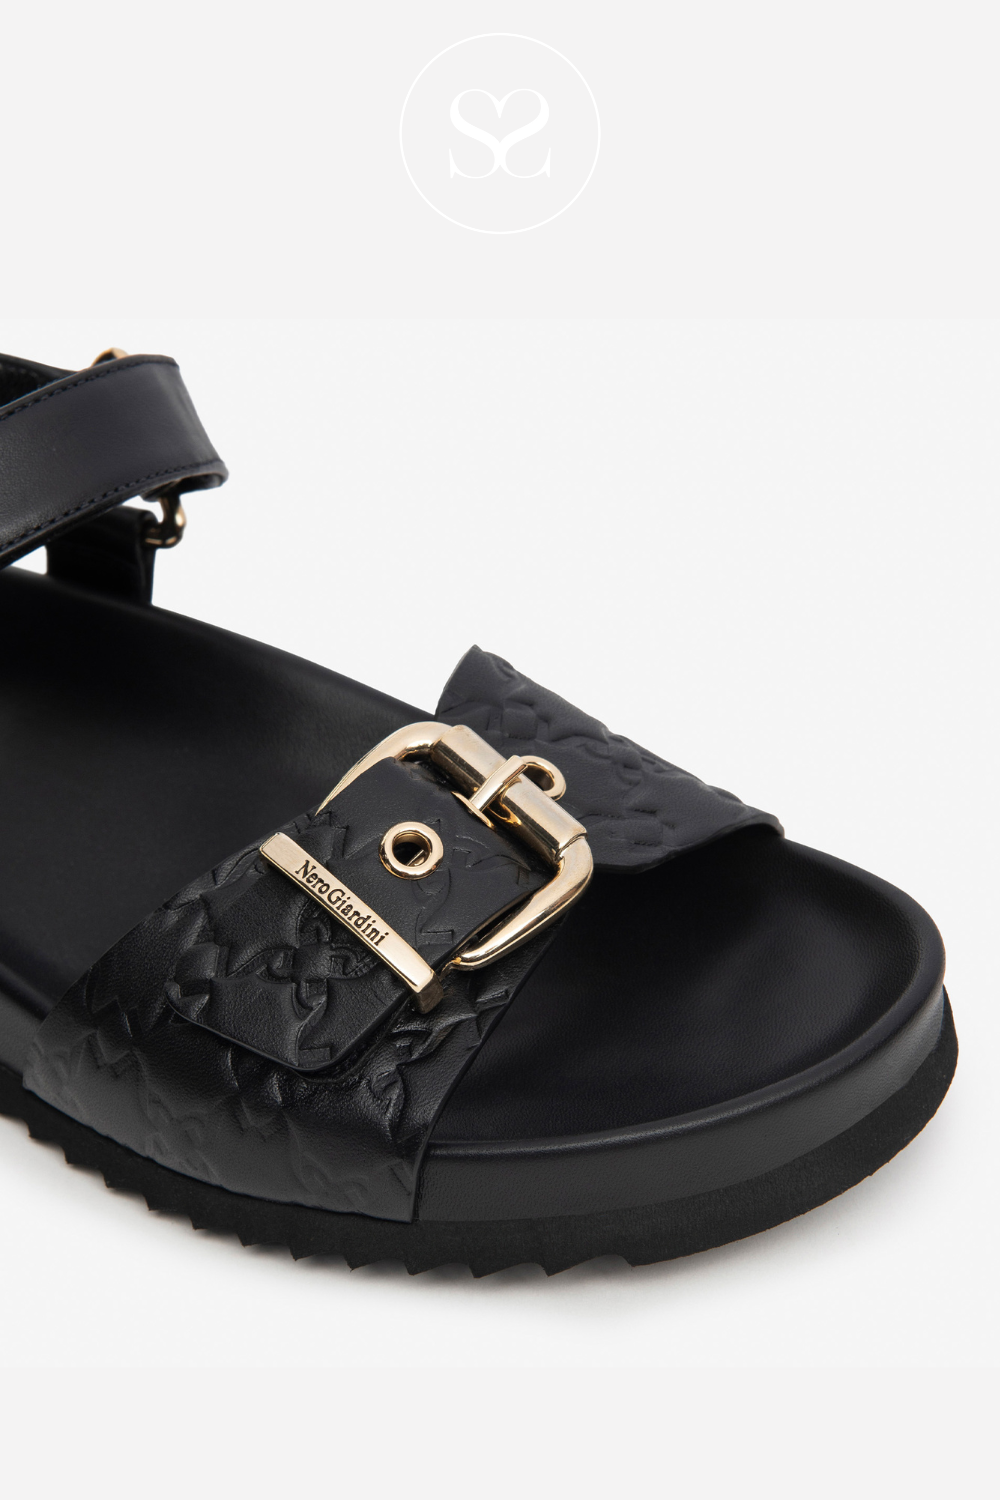 Black Velcro strap sandals with gold buckle from Nero Giardini for Women